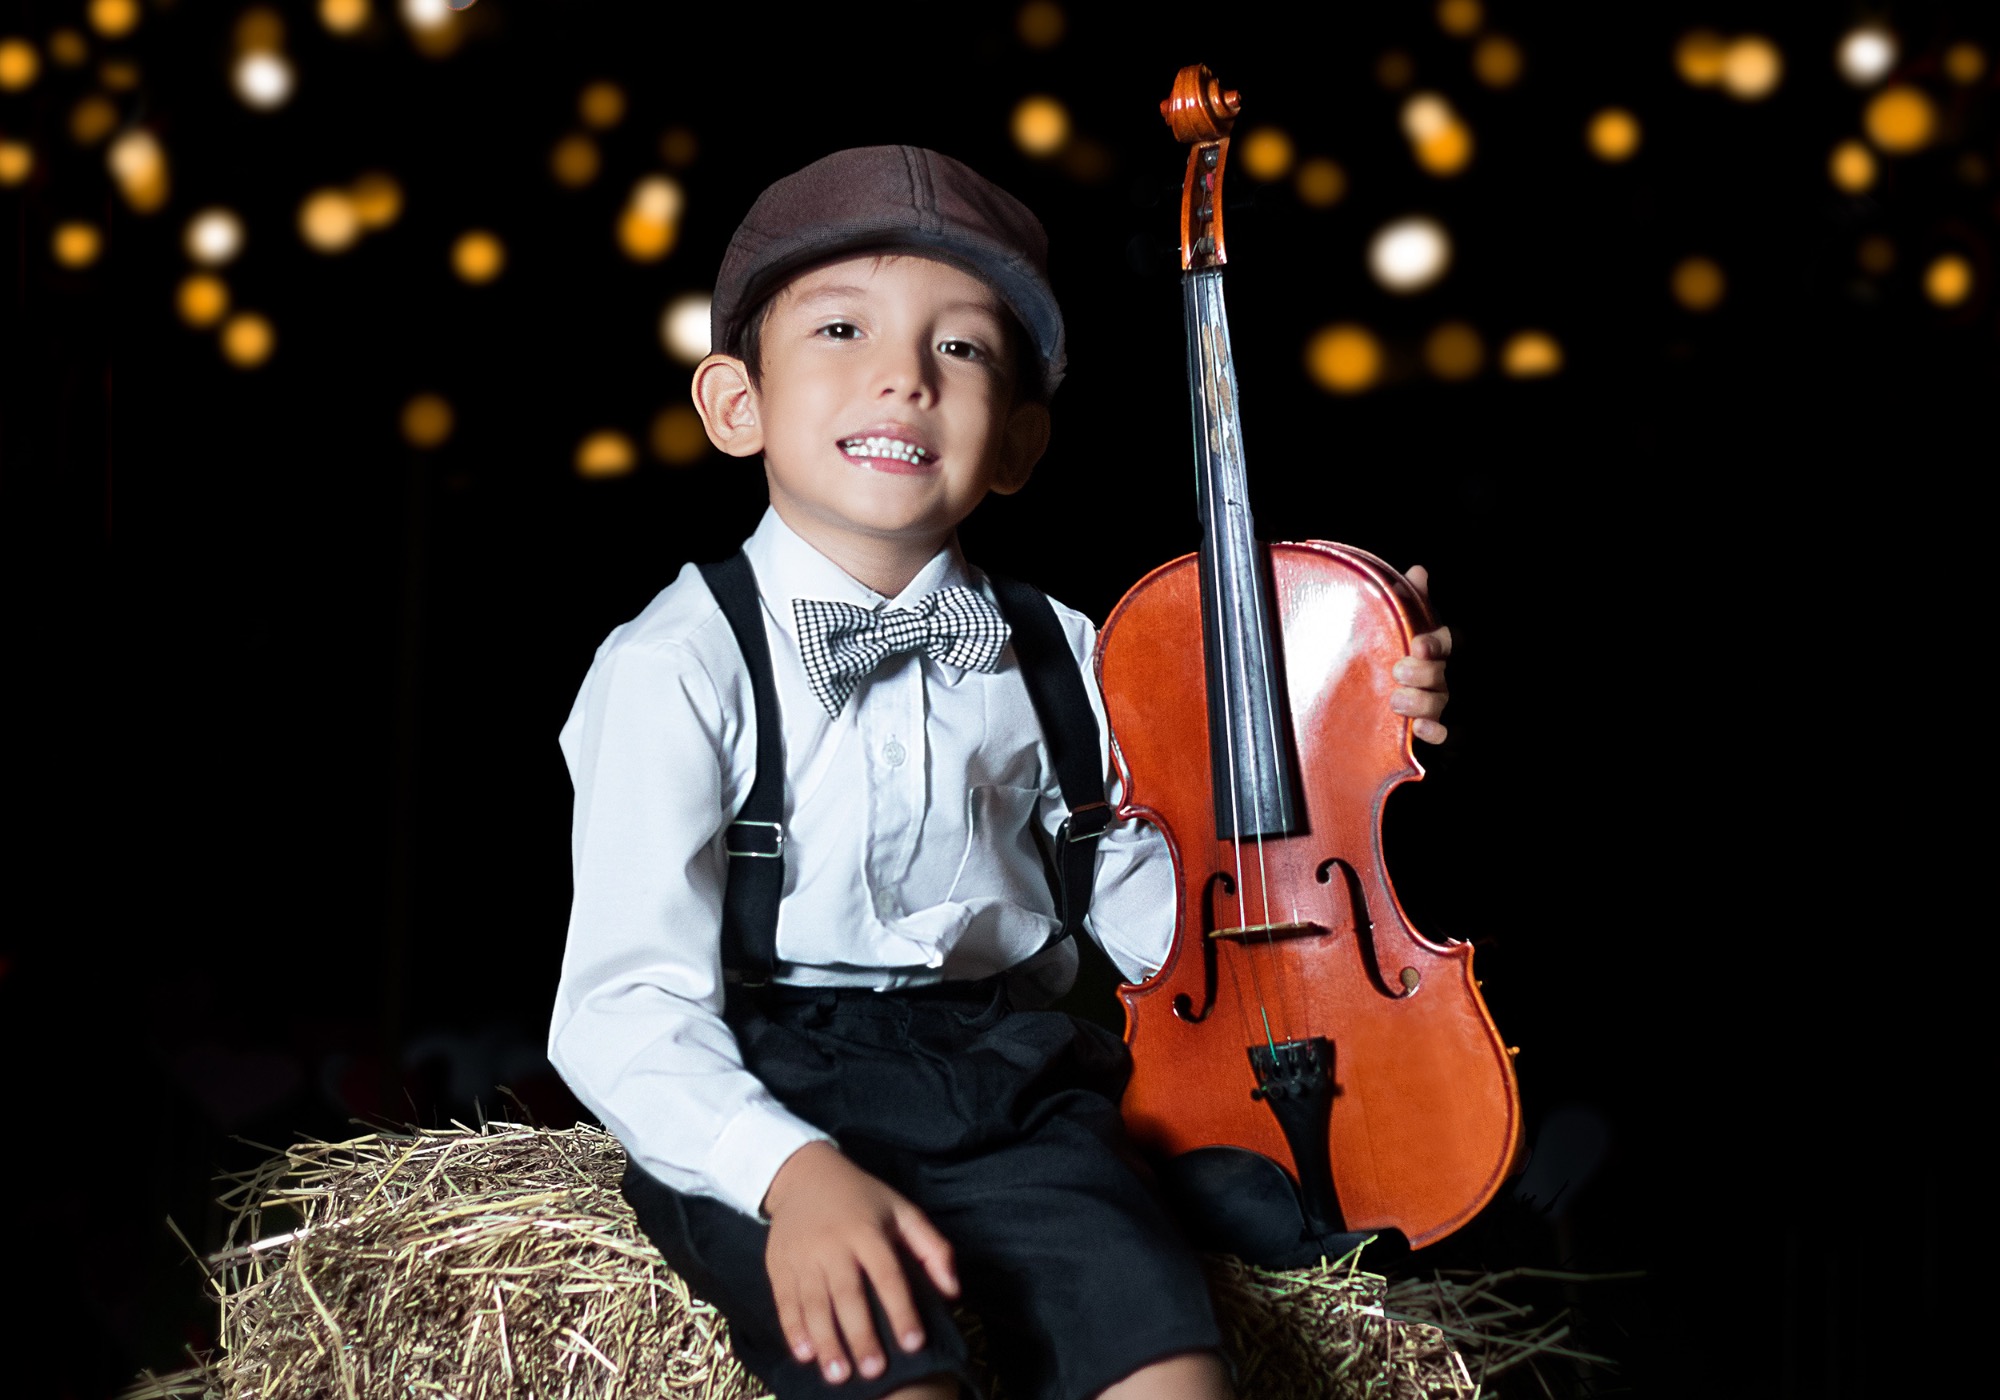 little boy sitting on a hay bale holding an oversized violin